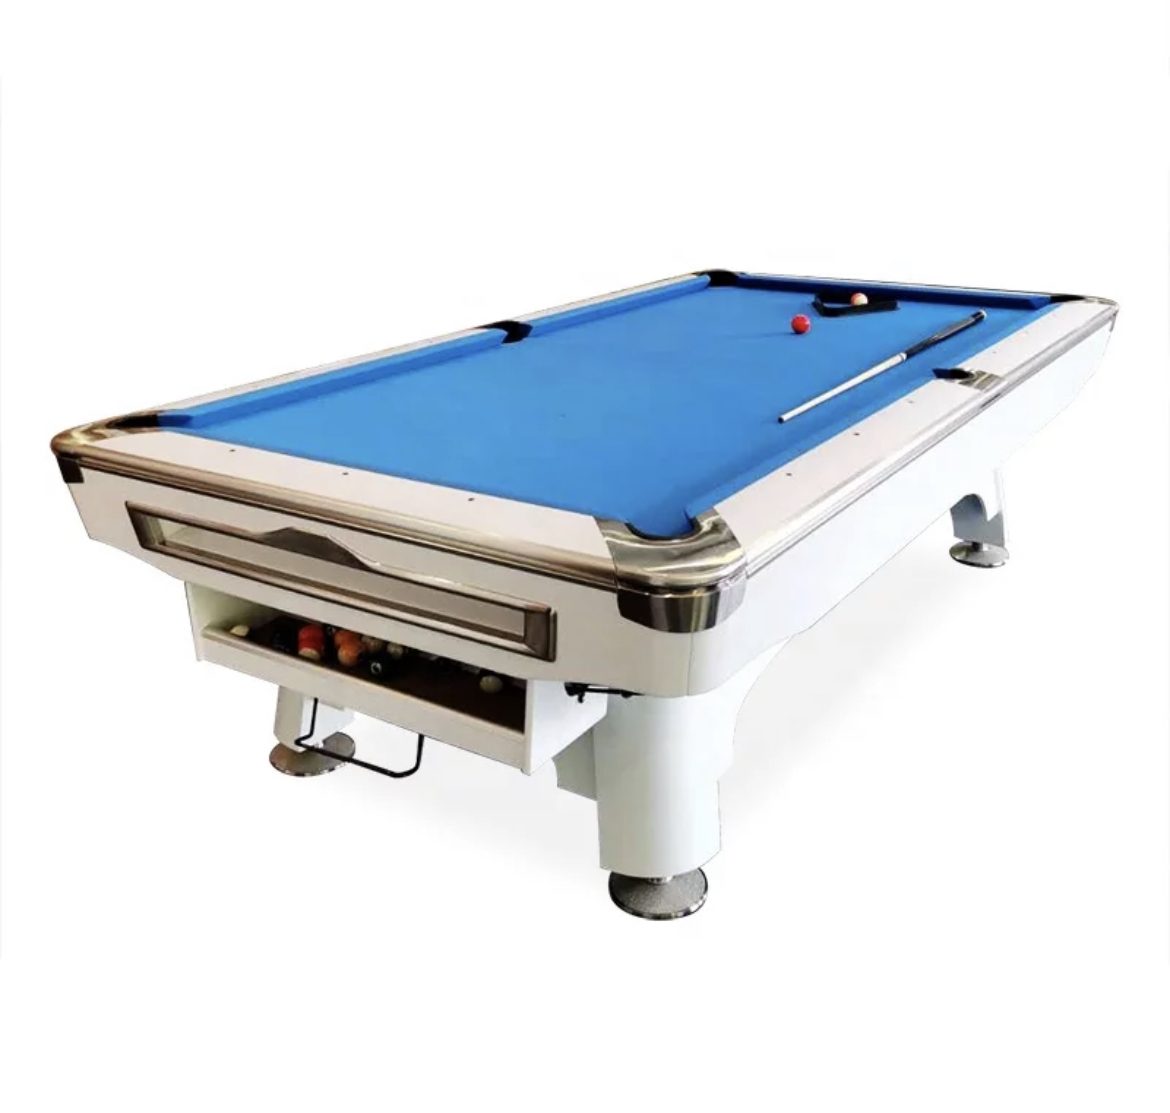 Imported Spencer American Pool Table